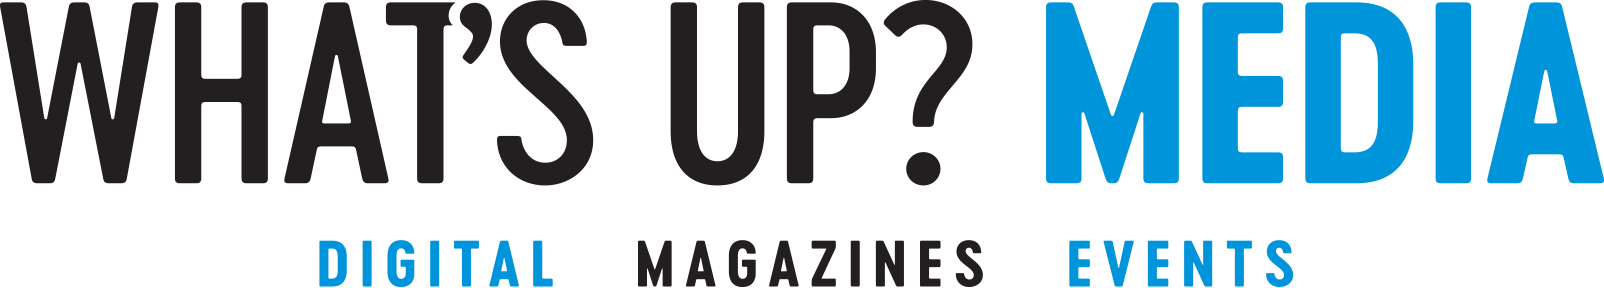 What's Up Media | Digital | Magazines | Events